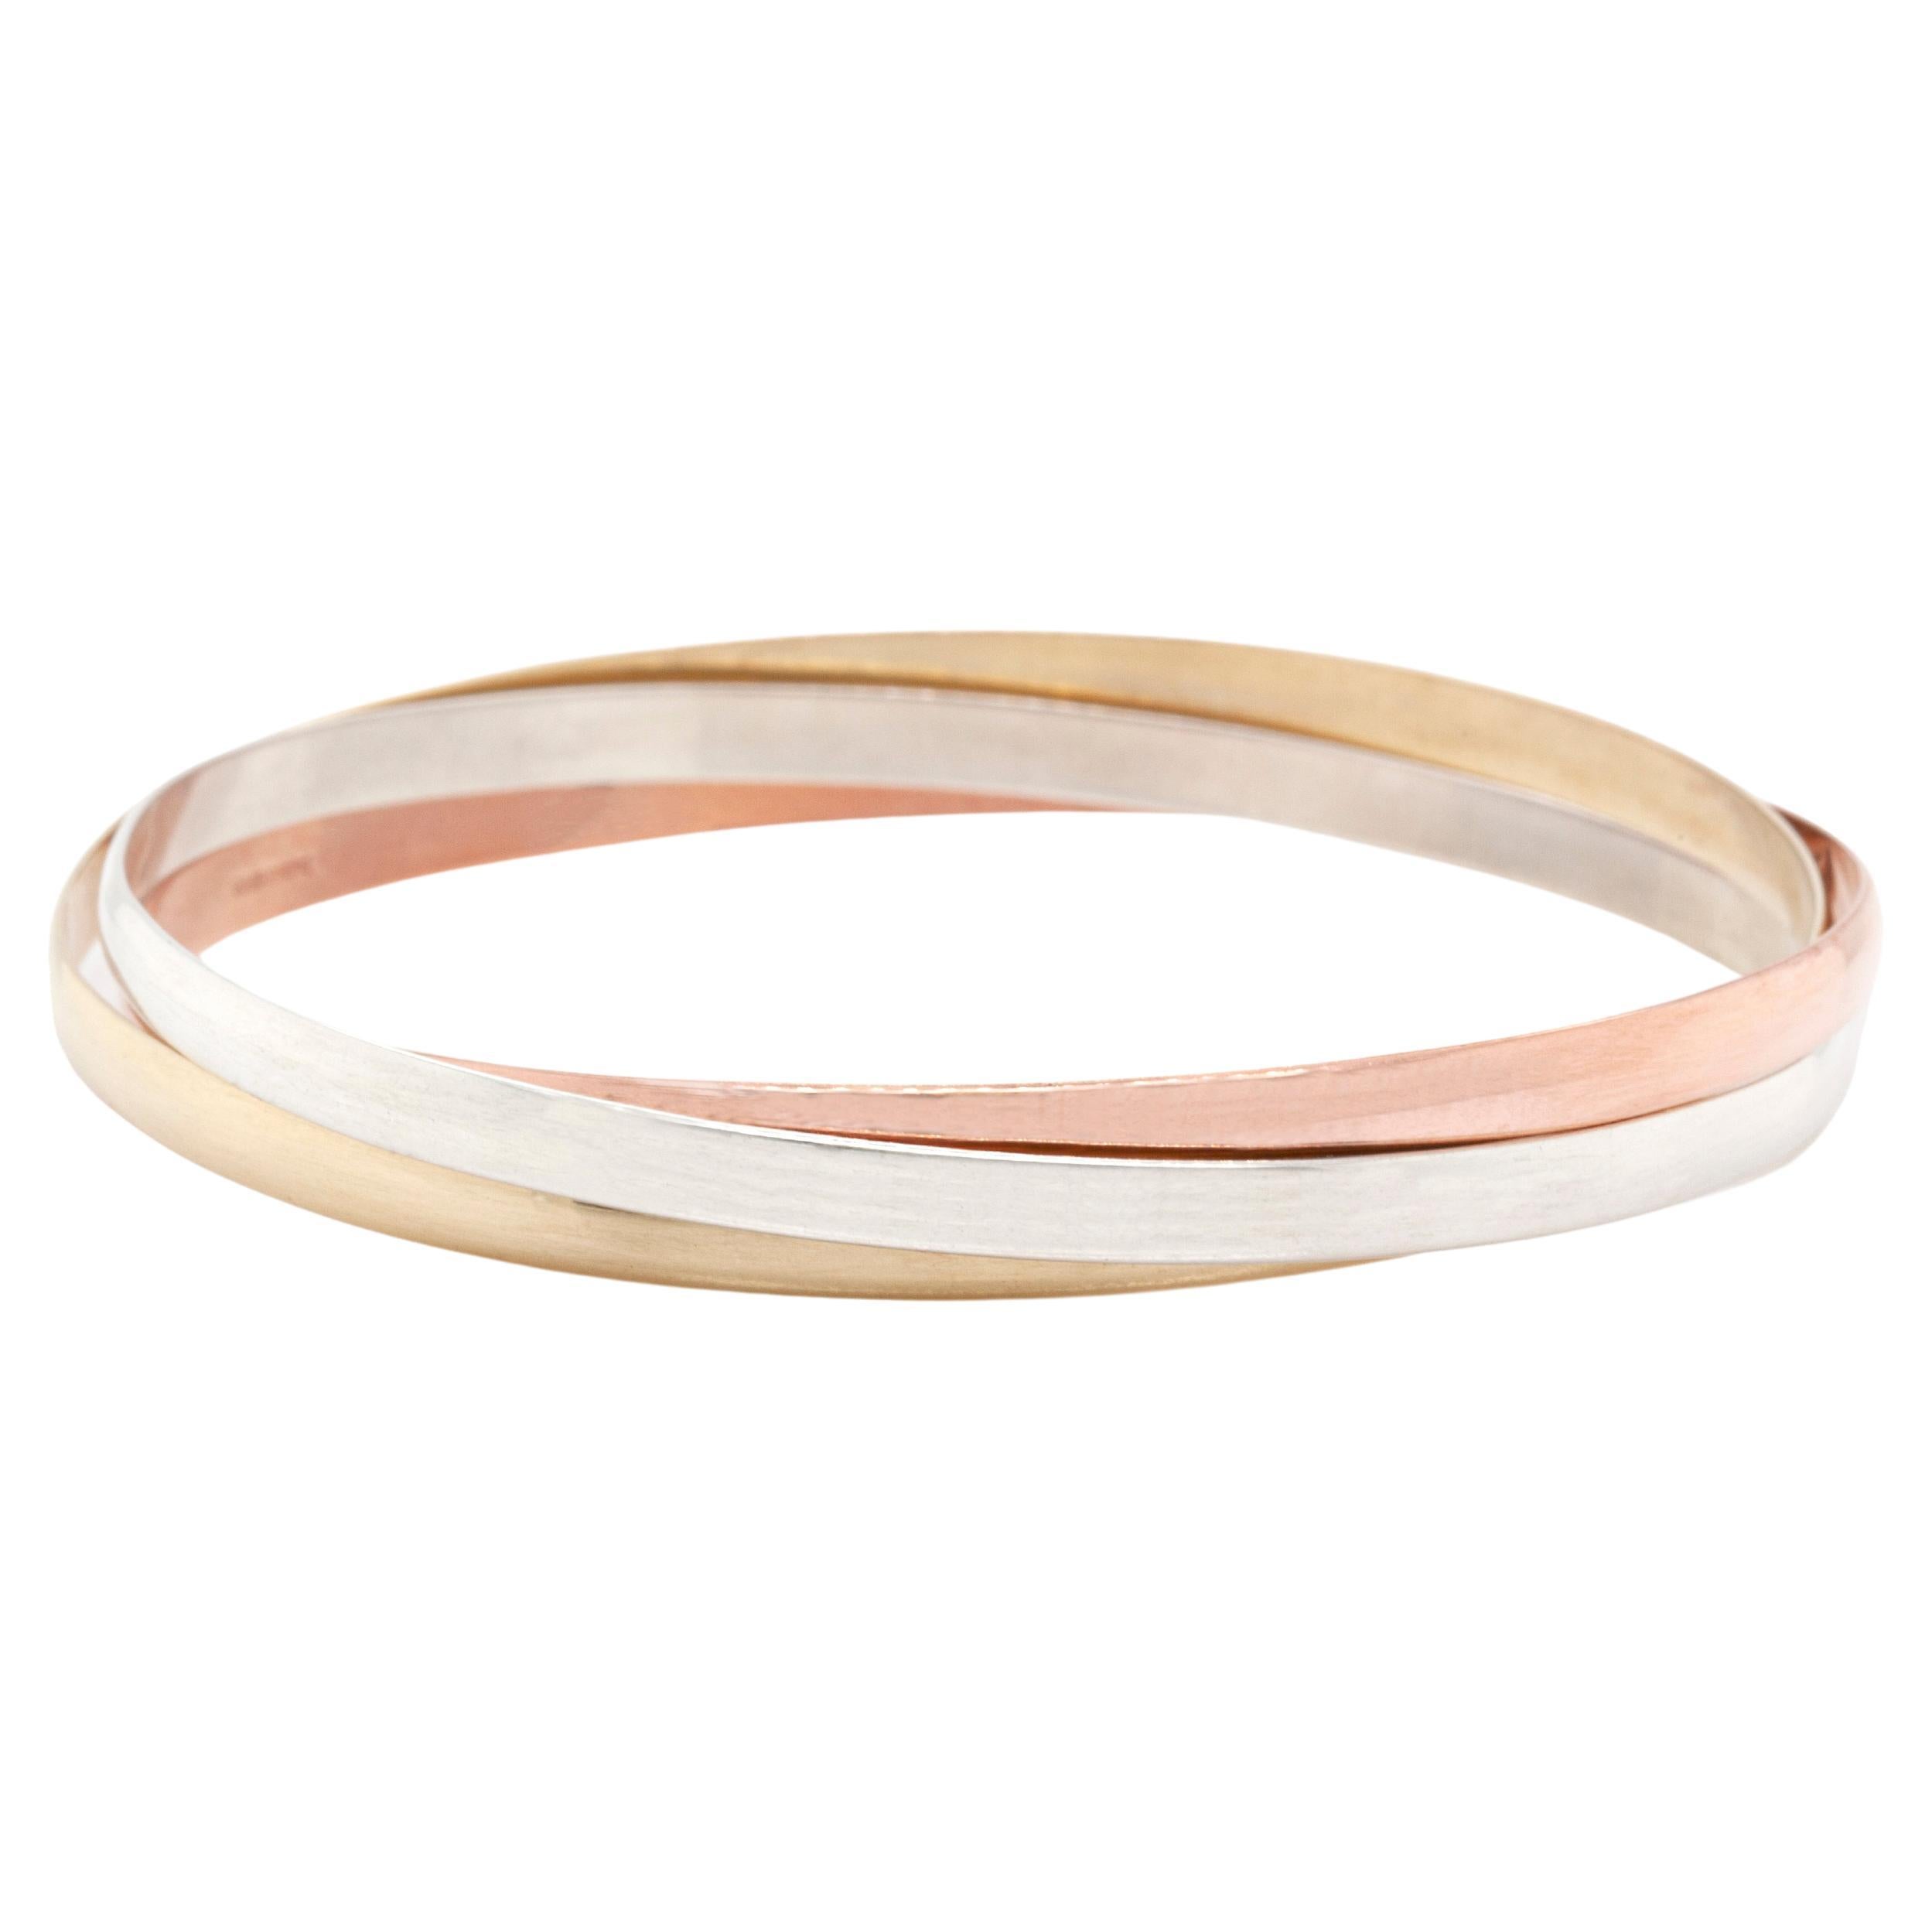  9ct Yellow, Rose and White Gold Russian Wedding Bangle